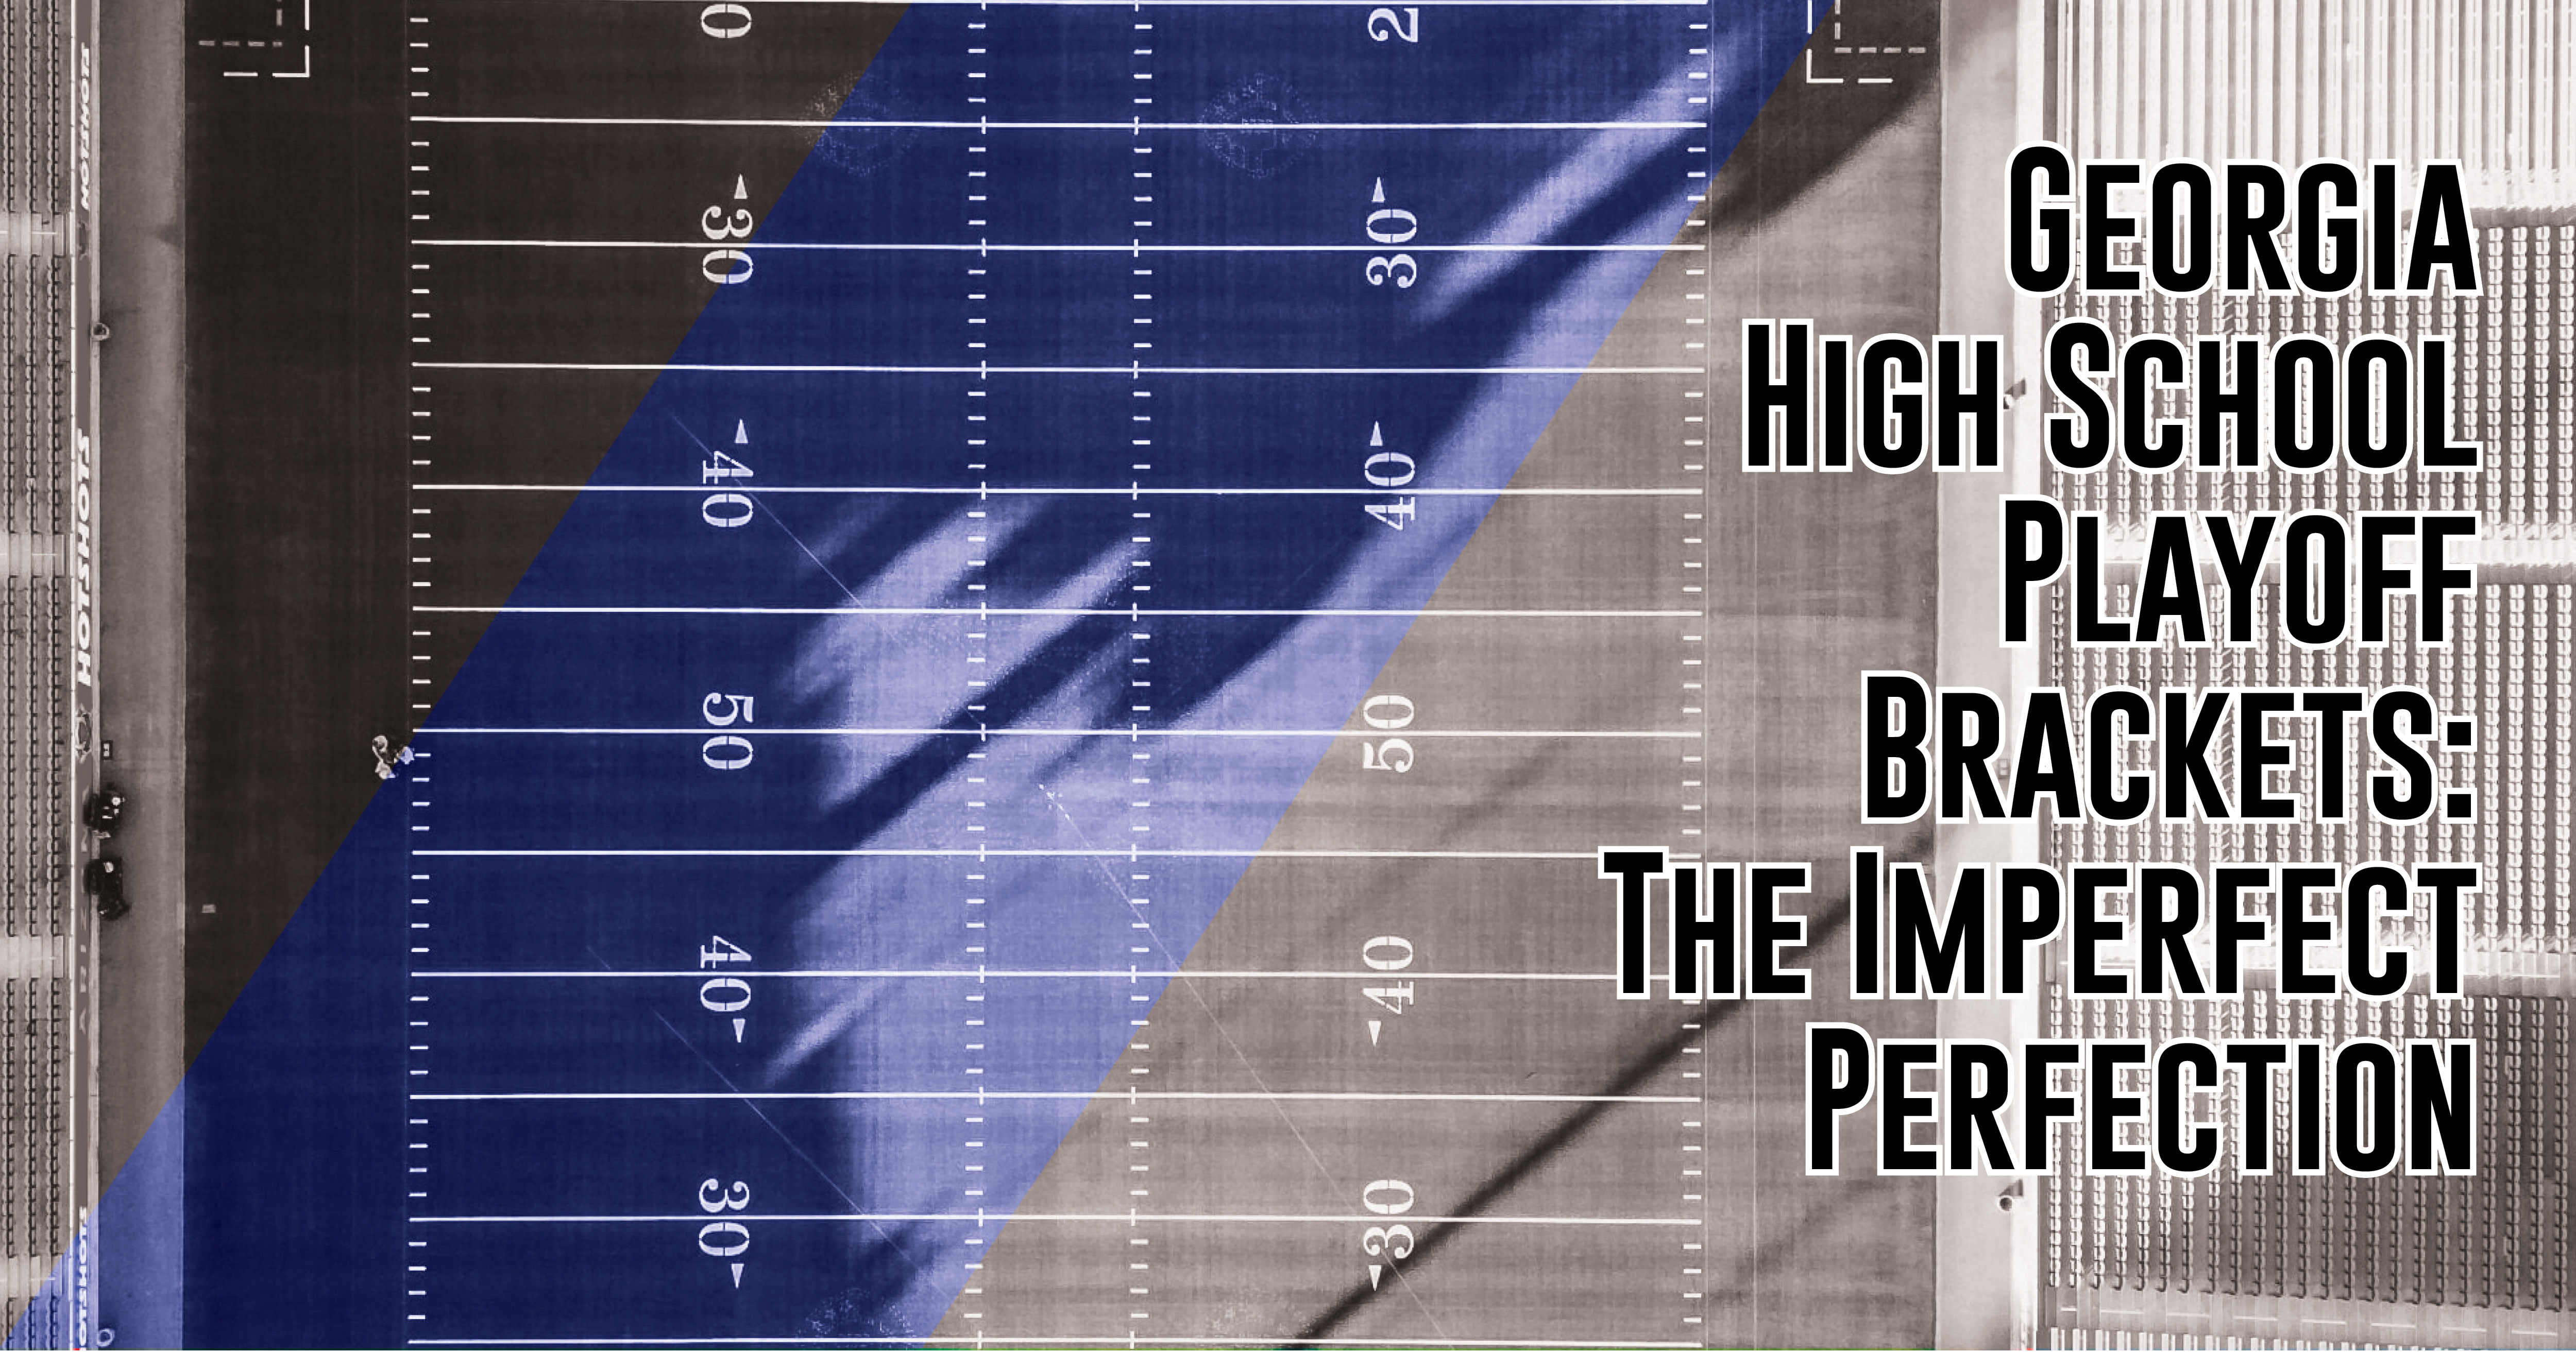 High School Football Playoff Brackets Imperfect Perfection